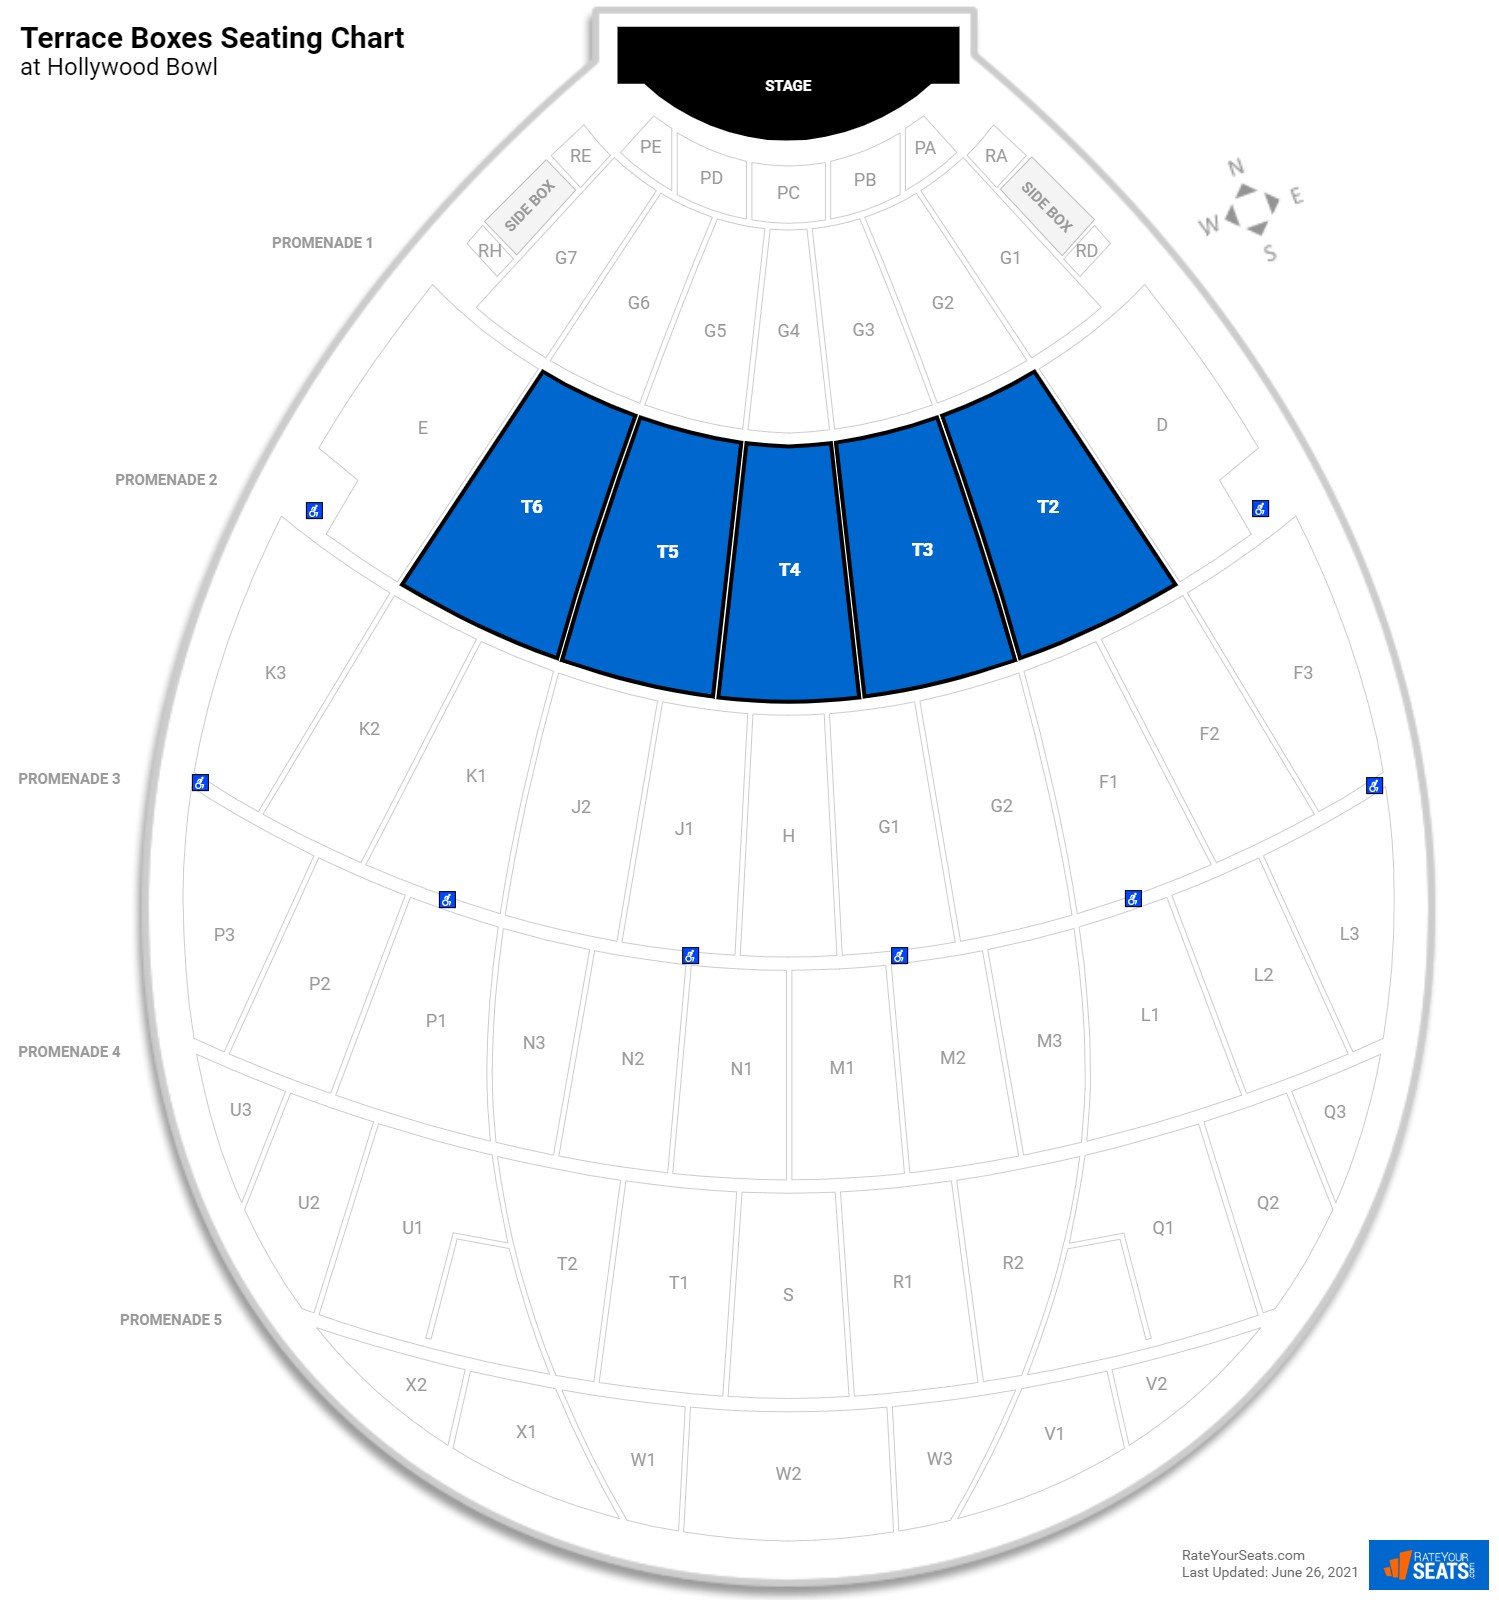 Concert Terrace Boxes Seating Chart at Hollywood Bowl